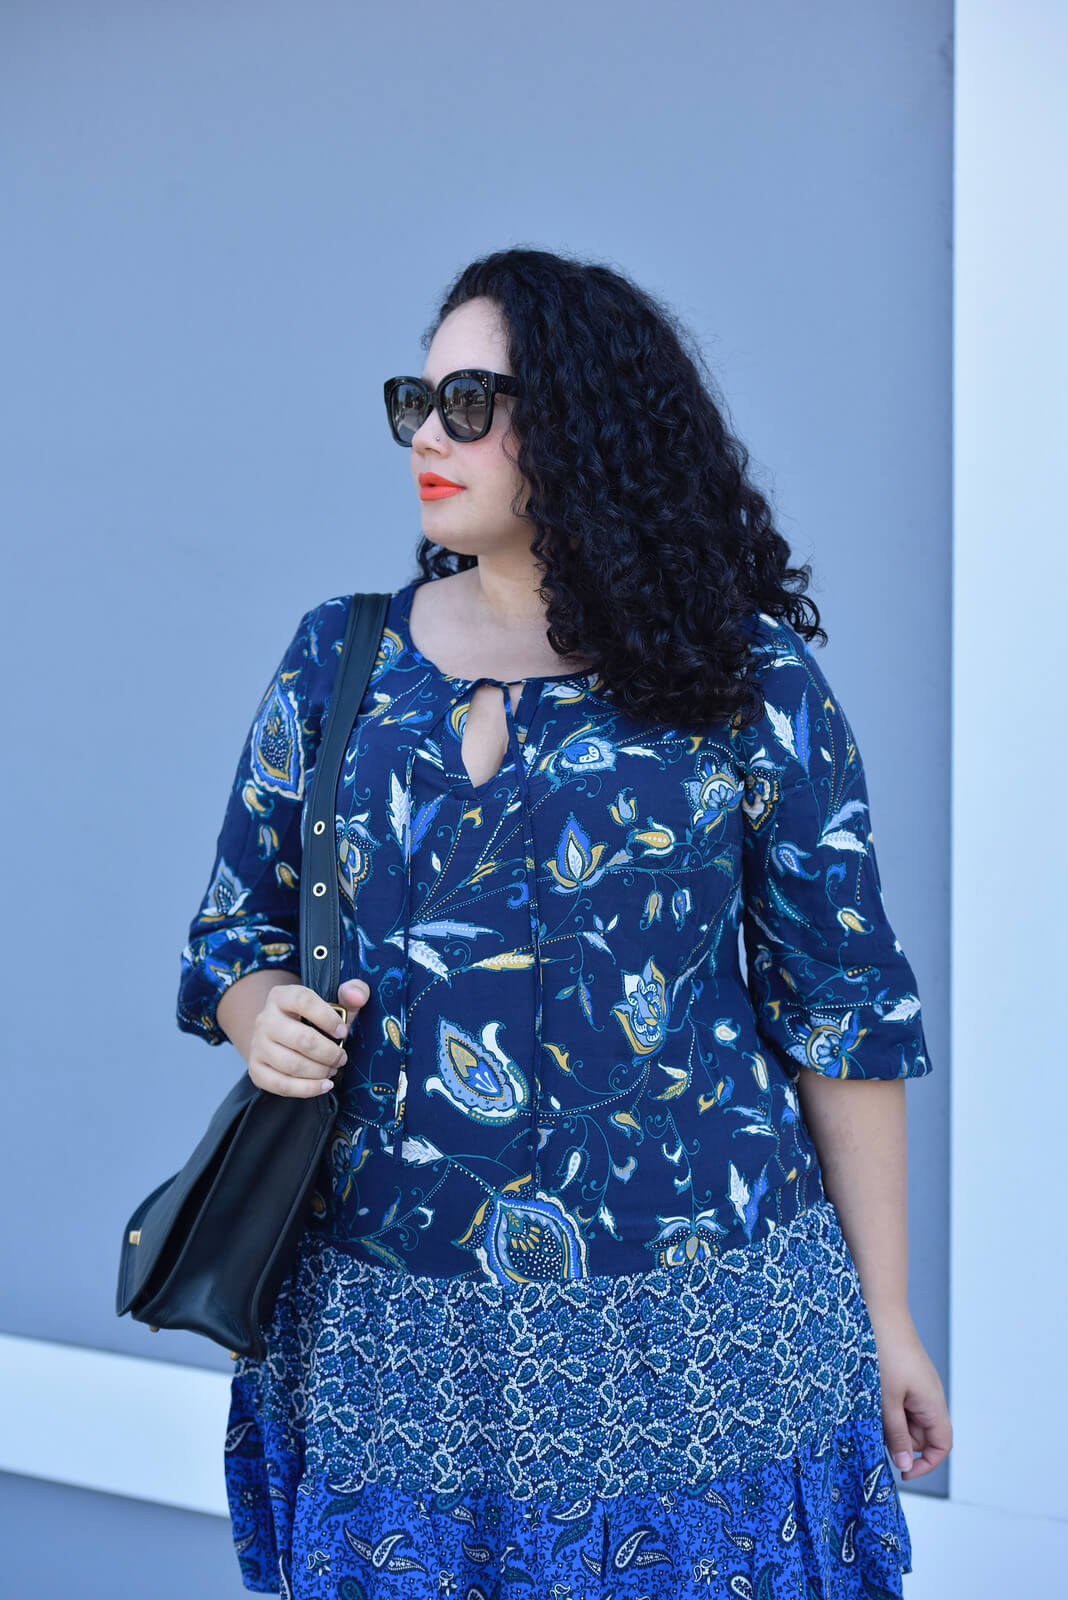 Girl With Curves featuring a Mixed Print Dress (plus size) and Coach Bag for fall.